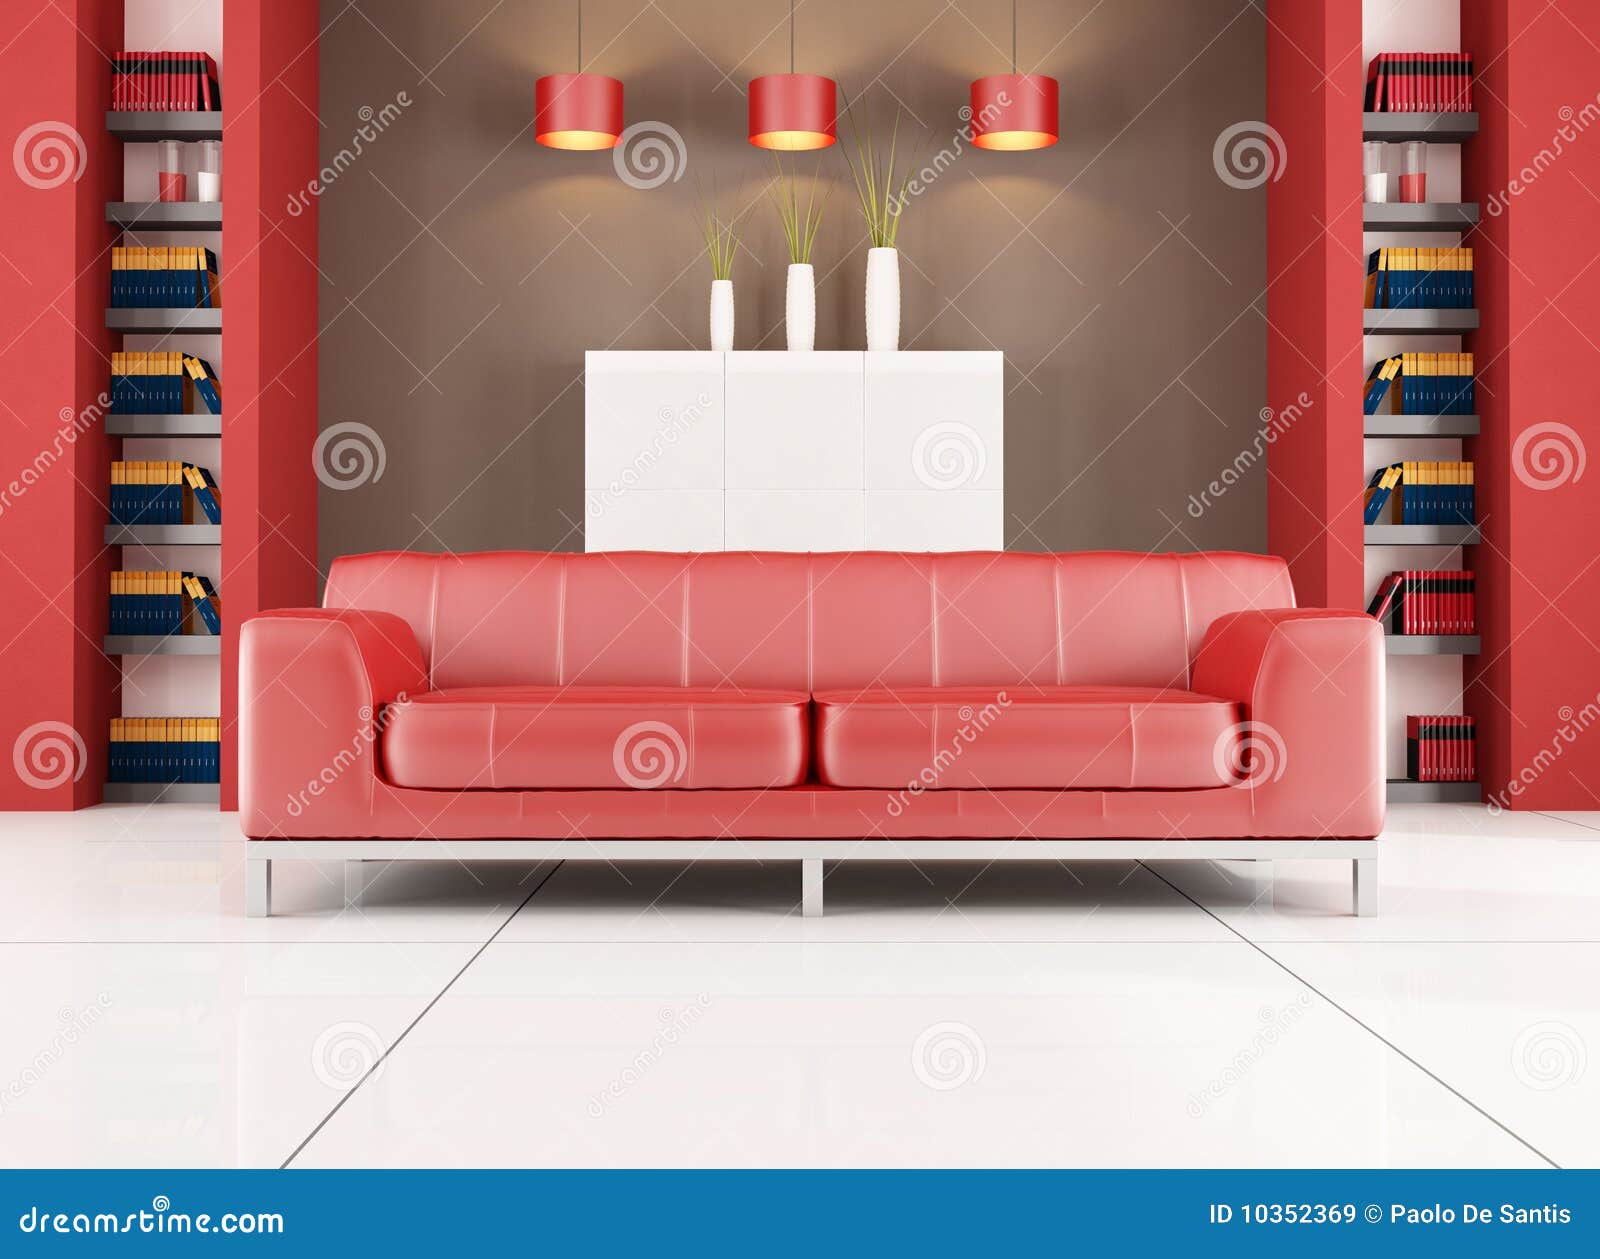 Red And Brown Contemporary Living Room Stock Illustration Illustration Of Book